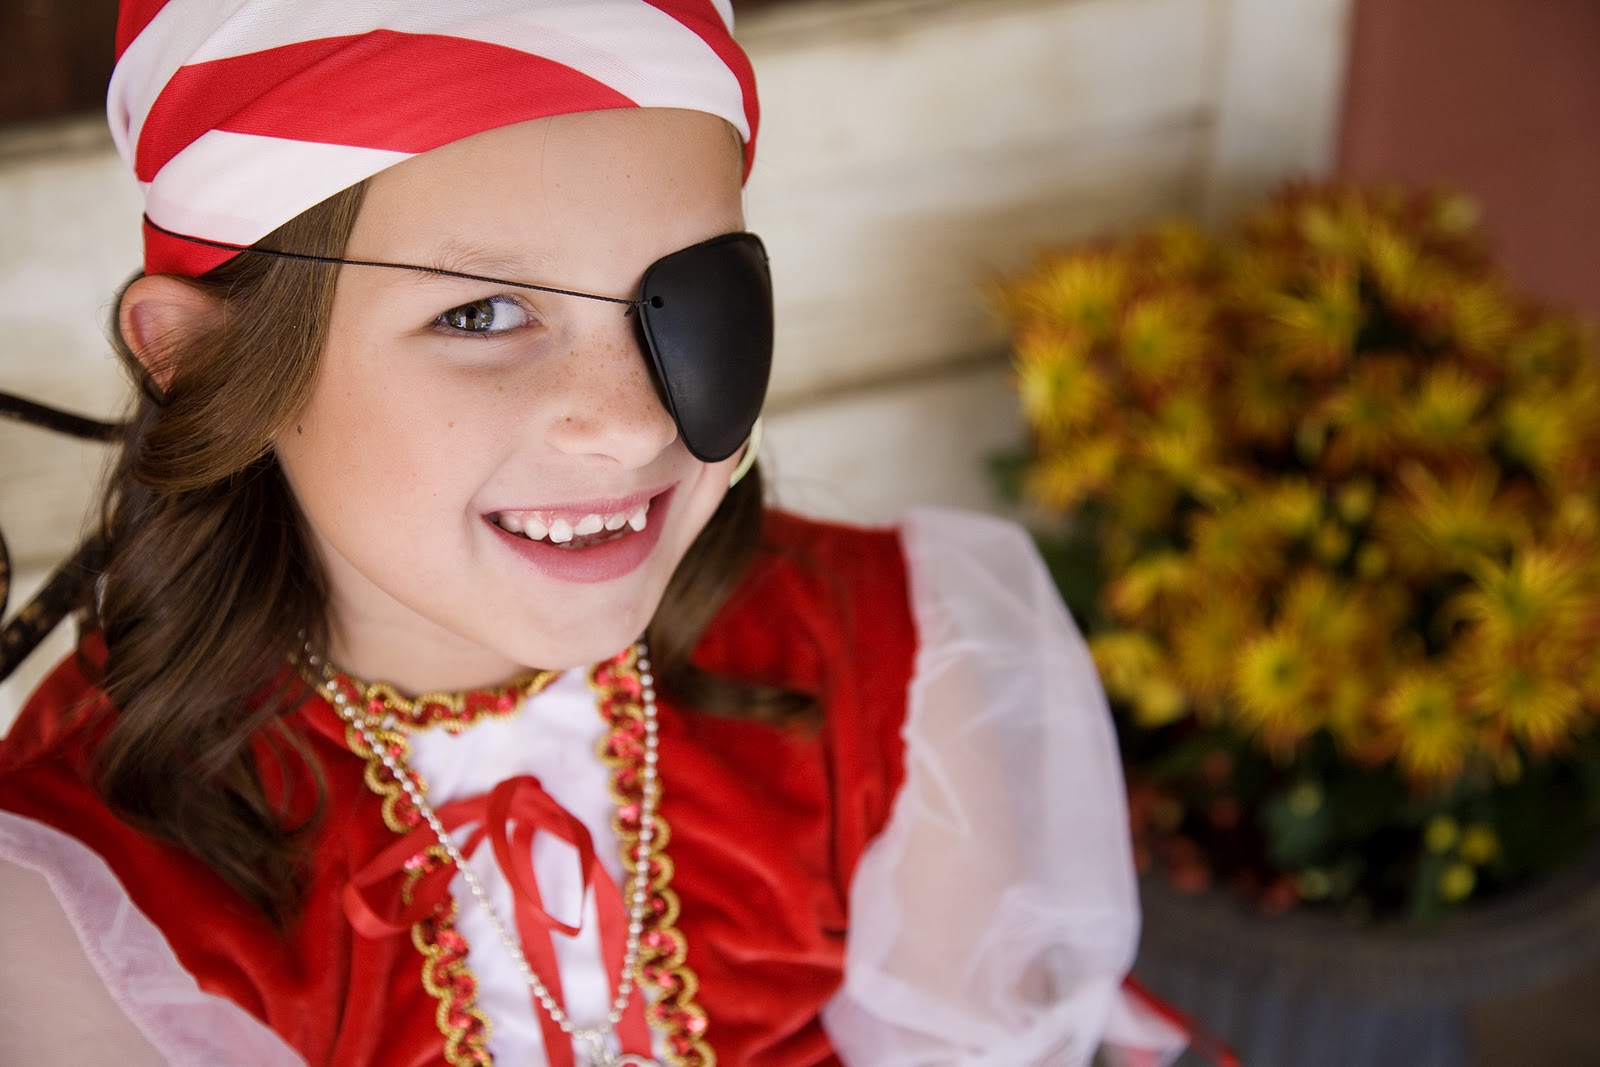 gardenview cottage: Halloween Pirate Pictures